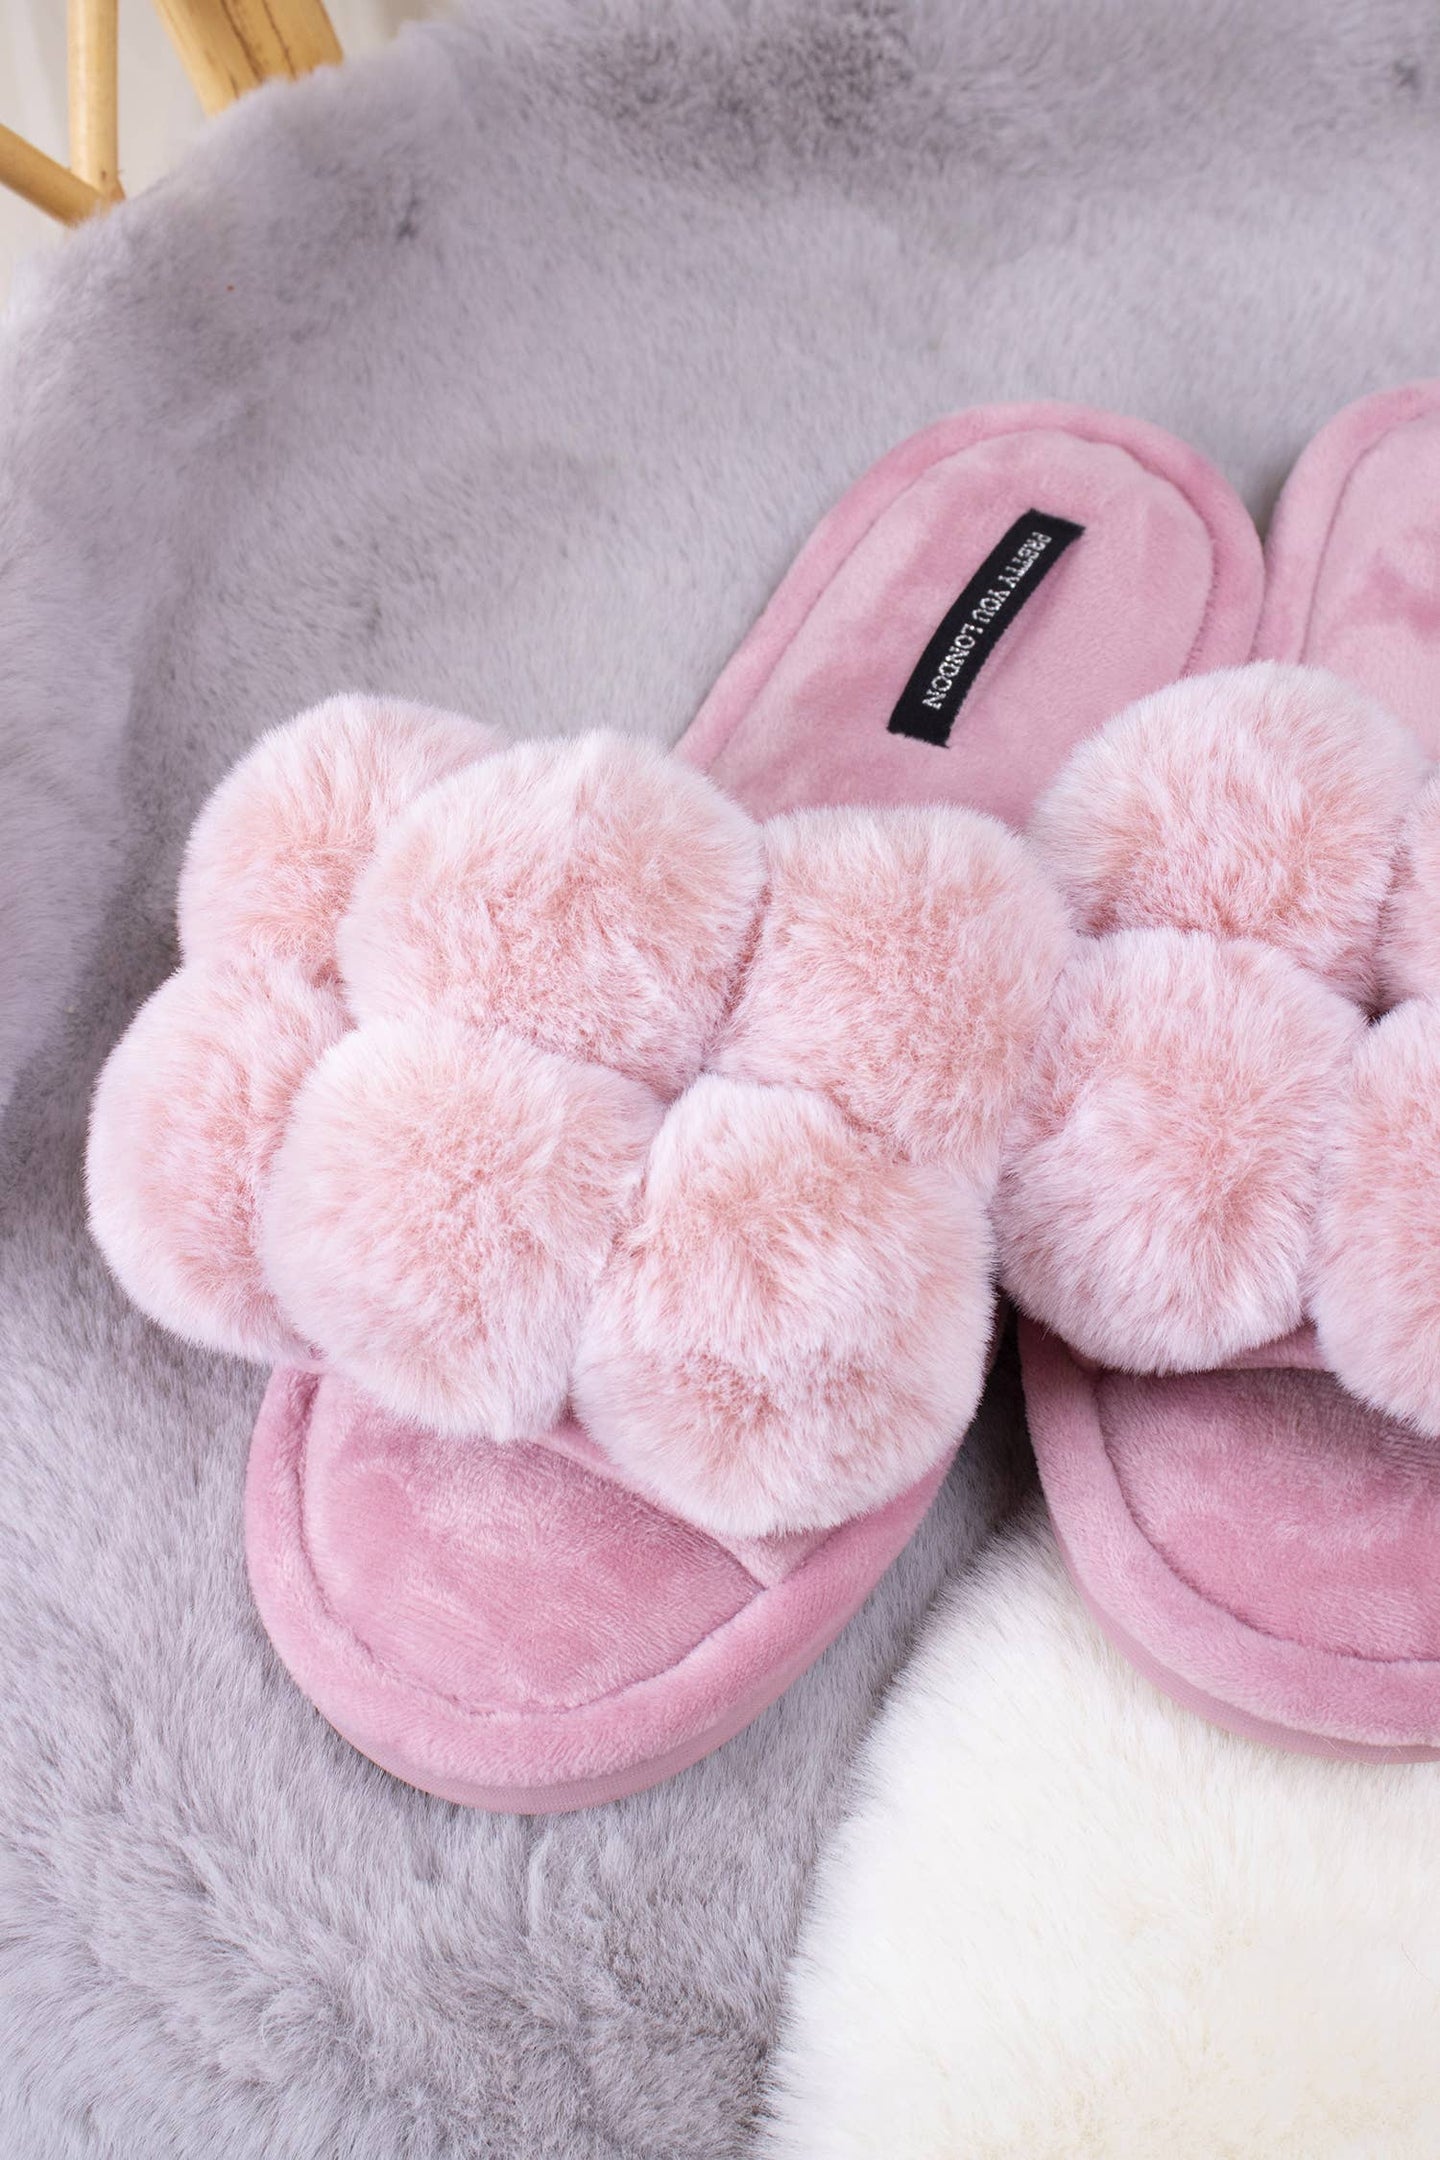 Pretty You London - Dolly Pom Pom Slippers in Pink: Pink / M = UK 5-6 / EU 38-39 / US 7-8